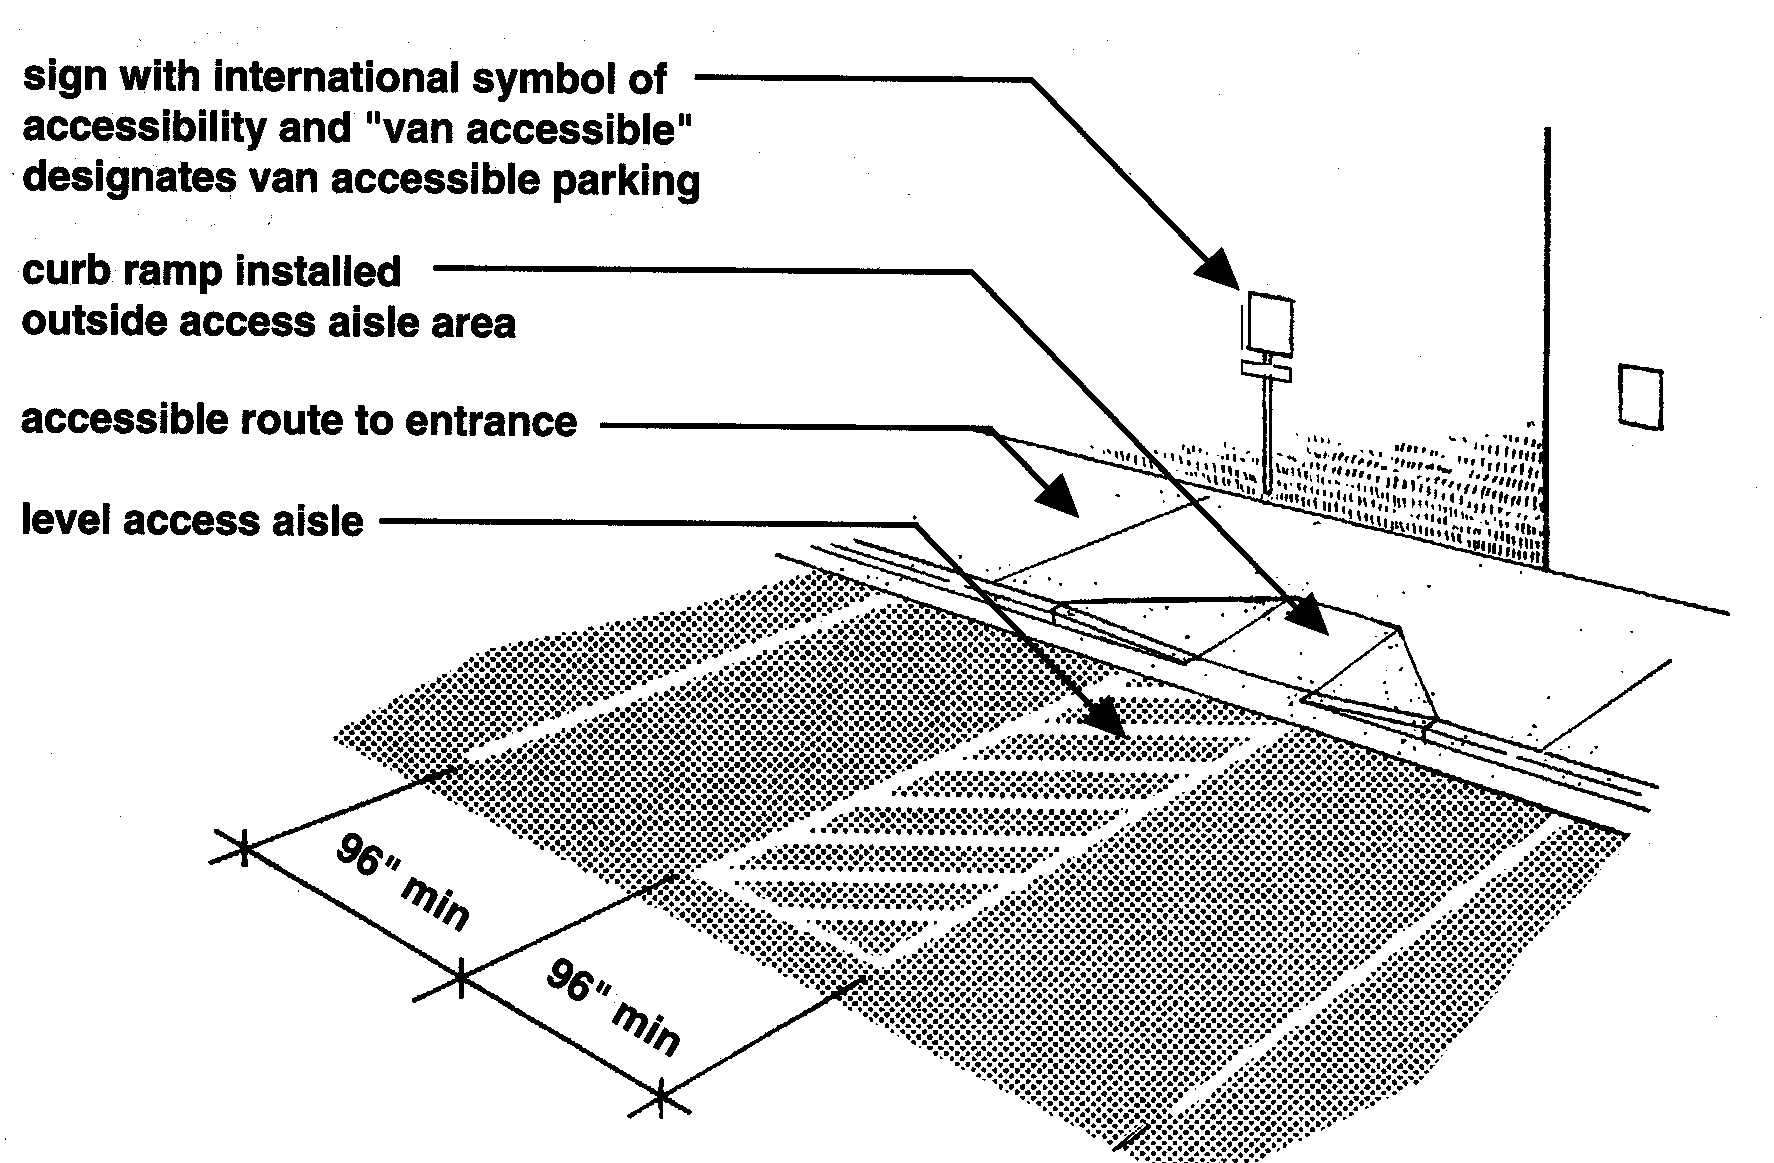 Diagram of Van Accessible Parking Space Elements - Black and white line drawing of an area of a parking lot. One van accessible parking space is shown with an eight foot wide marked access aisle located to the right of the vehicle parking space. A sidewalk is located in front of the parking spaces with a flared curb ramp placed where the access aisle meets the sidewalk. A sign designating accessible parking is located in front of the van parking space. Notes for the drawing: sign with international symbol of accessibility and "van accessible" designates van accessible parking (arrow points to the sign). Curb ramp installed outside the access aisle area (arrow points to the curb ramp). Accessible route to entrance (arrow points to the sidewalk located in front of the parking space). Level access aisle (arrow points to the access aisle).